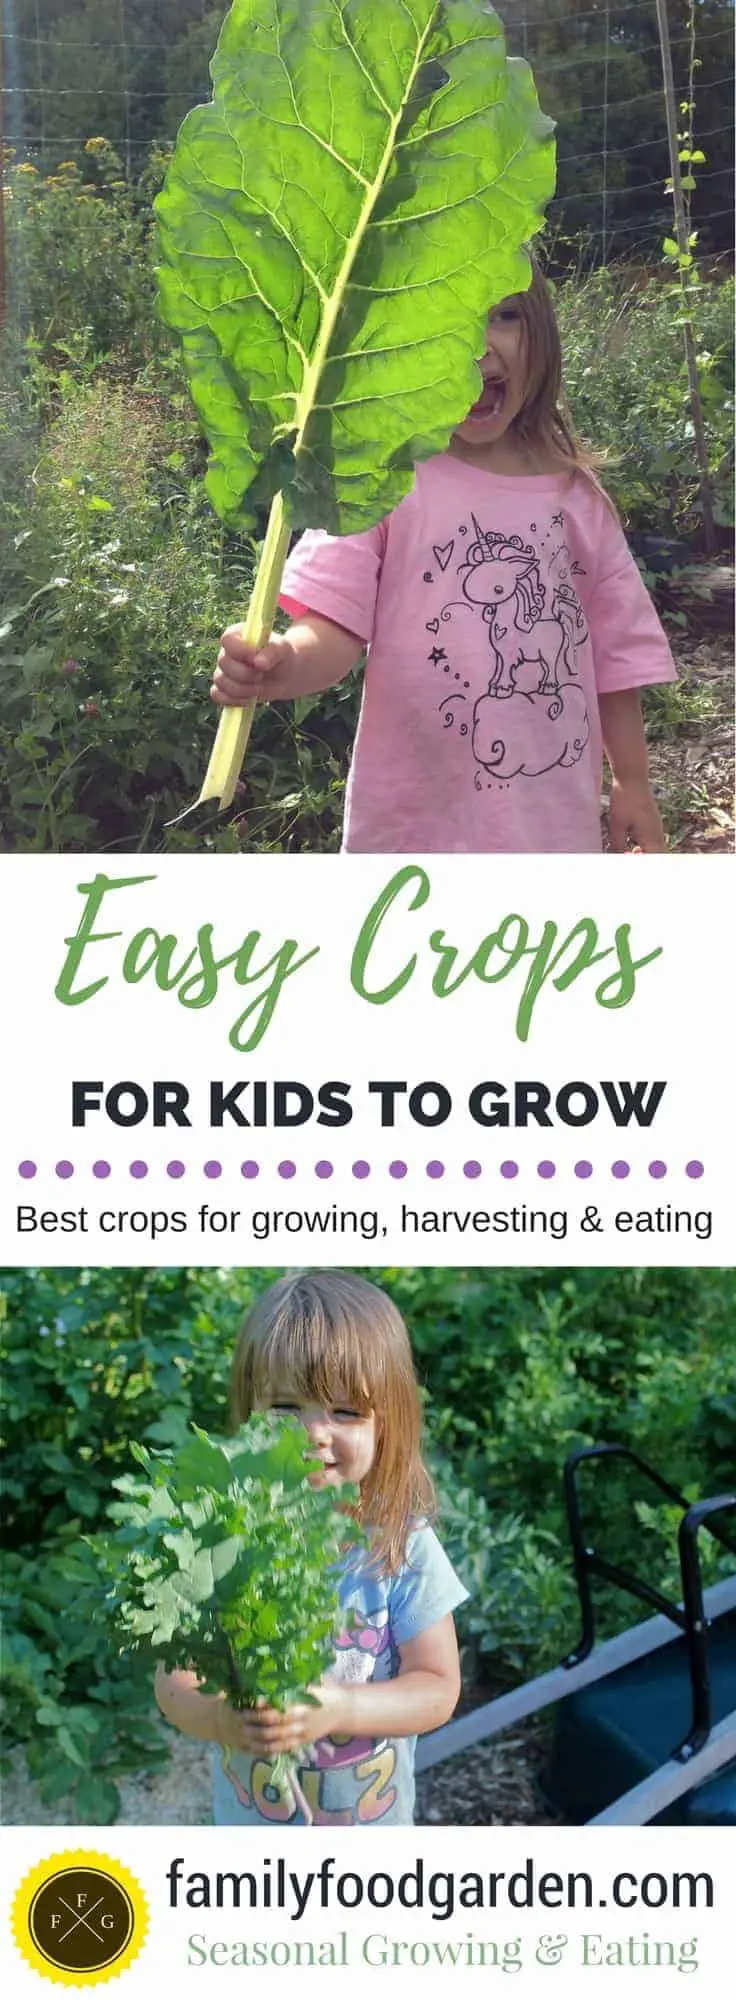 Easy seeds for little hands to grow, harvest & eat from the garden